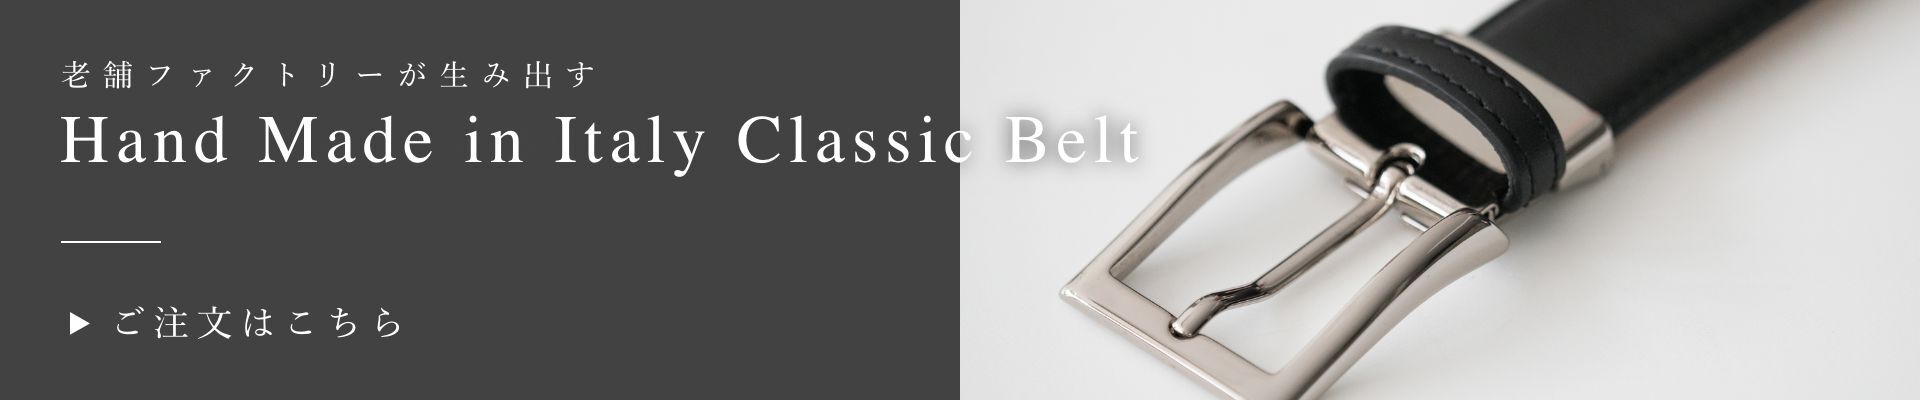 Hand Made in Italy Classic Belt Banner